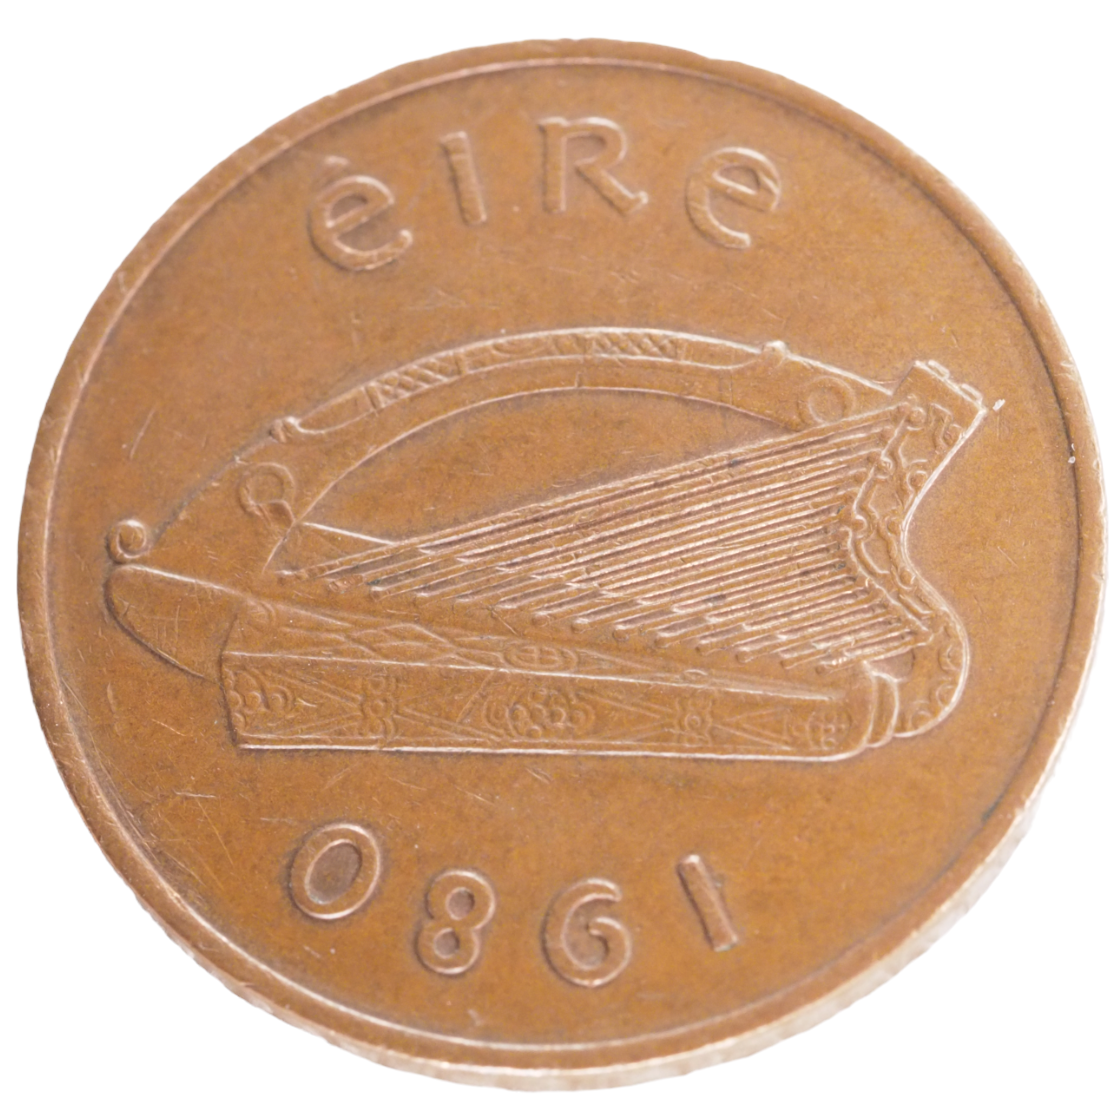 2p Ireland, 1980 Coin- Harp and Celtic Bird- Eire/ Ireland two pingin/ two pence, KM# 21